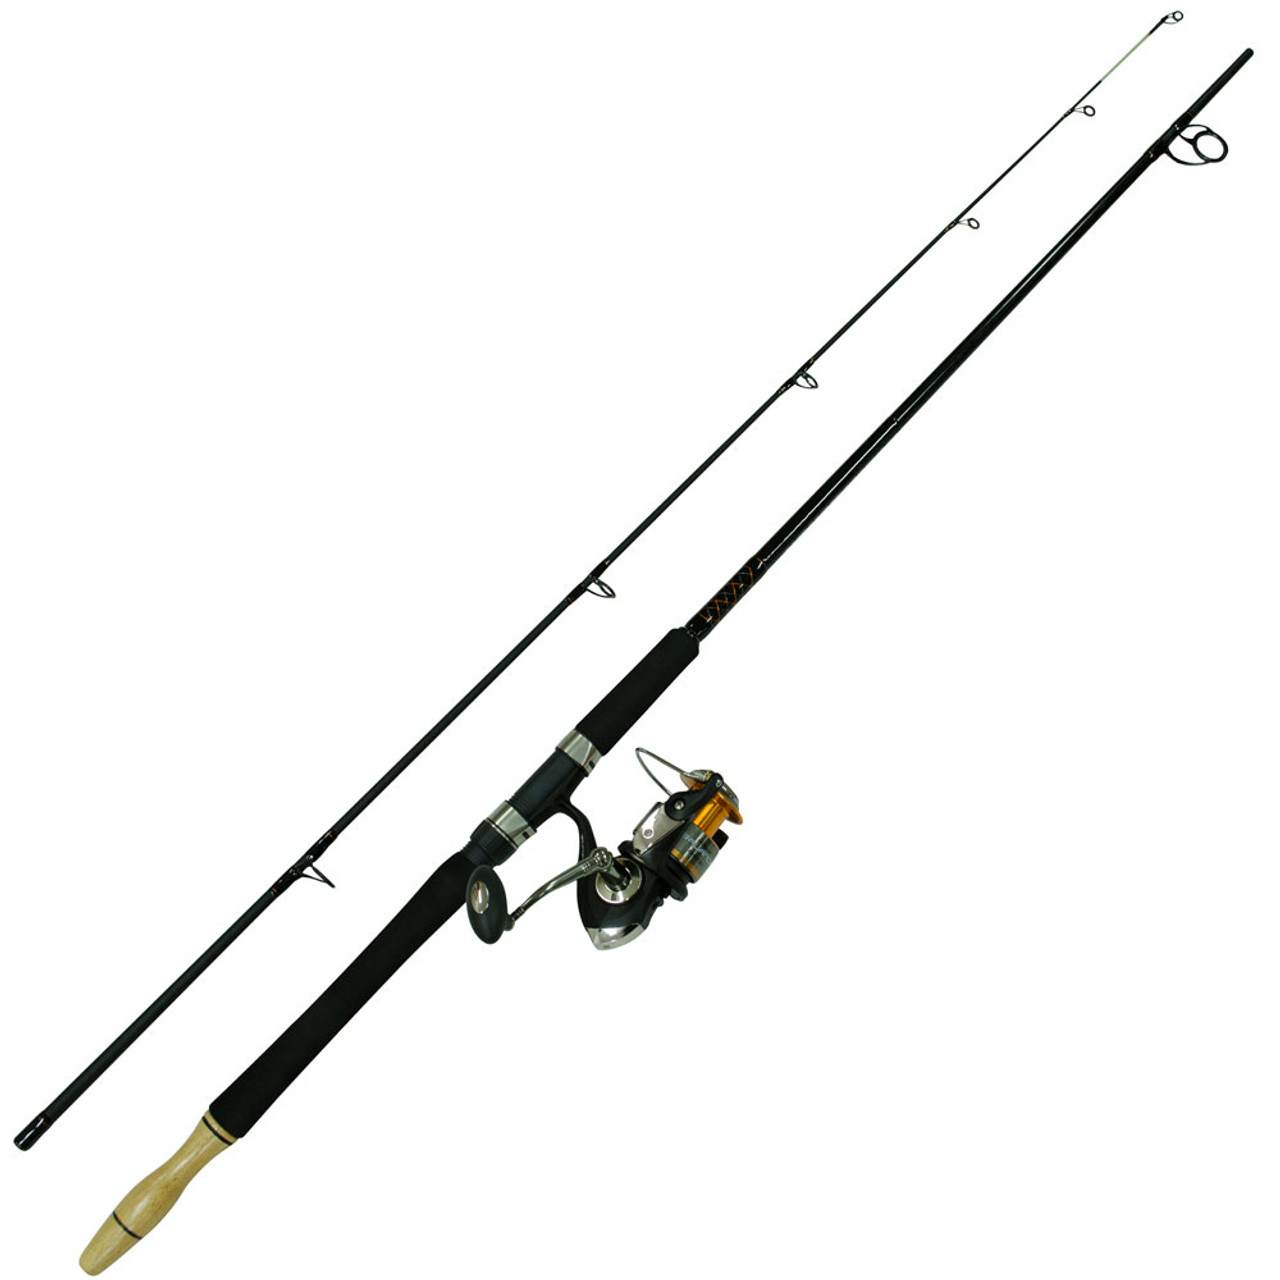 Ugly Stik Fishing Reel and Rod Combo Kits (All Models & Sizes) 5' - Light -  2pc: Buy Online at Best Price in UAE 